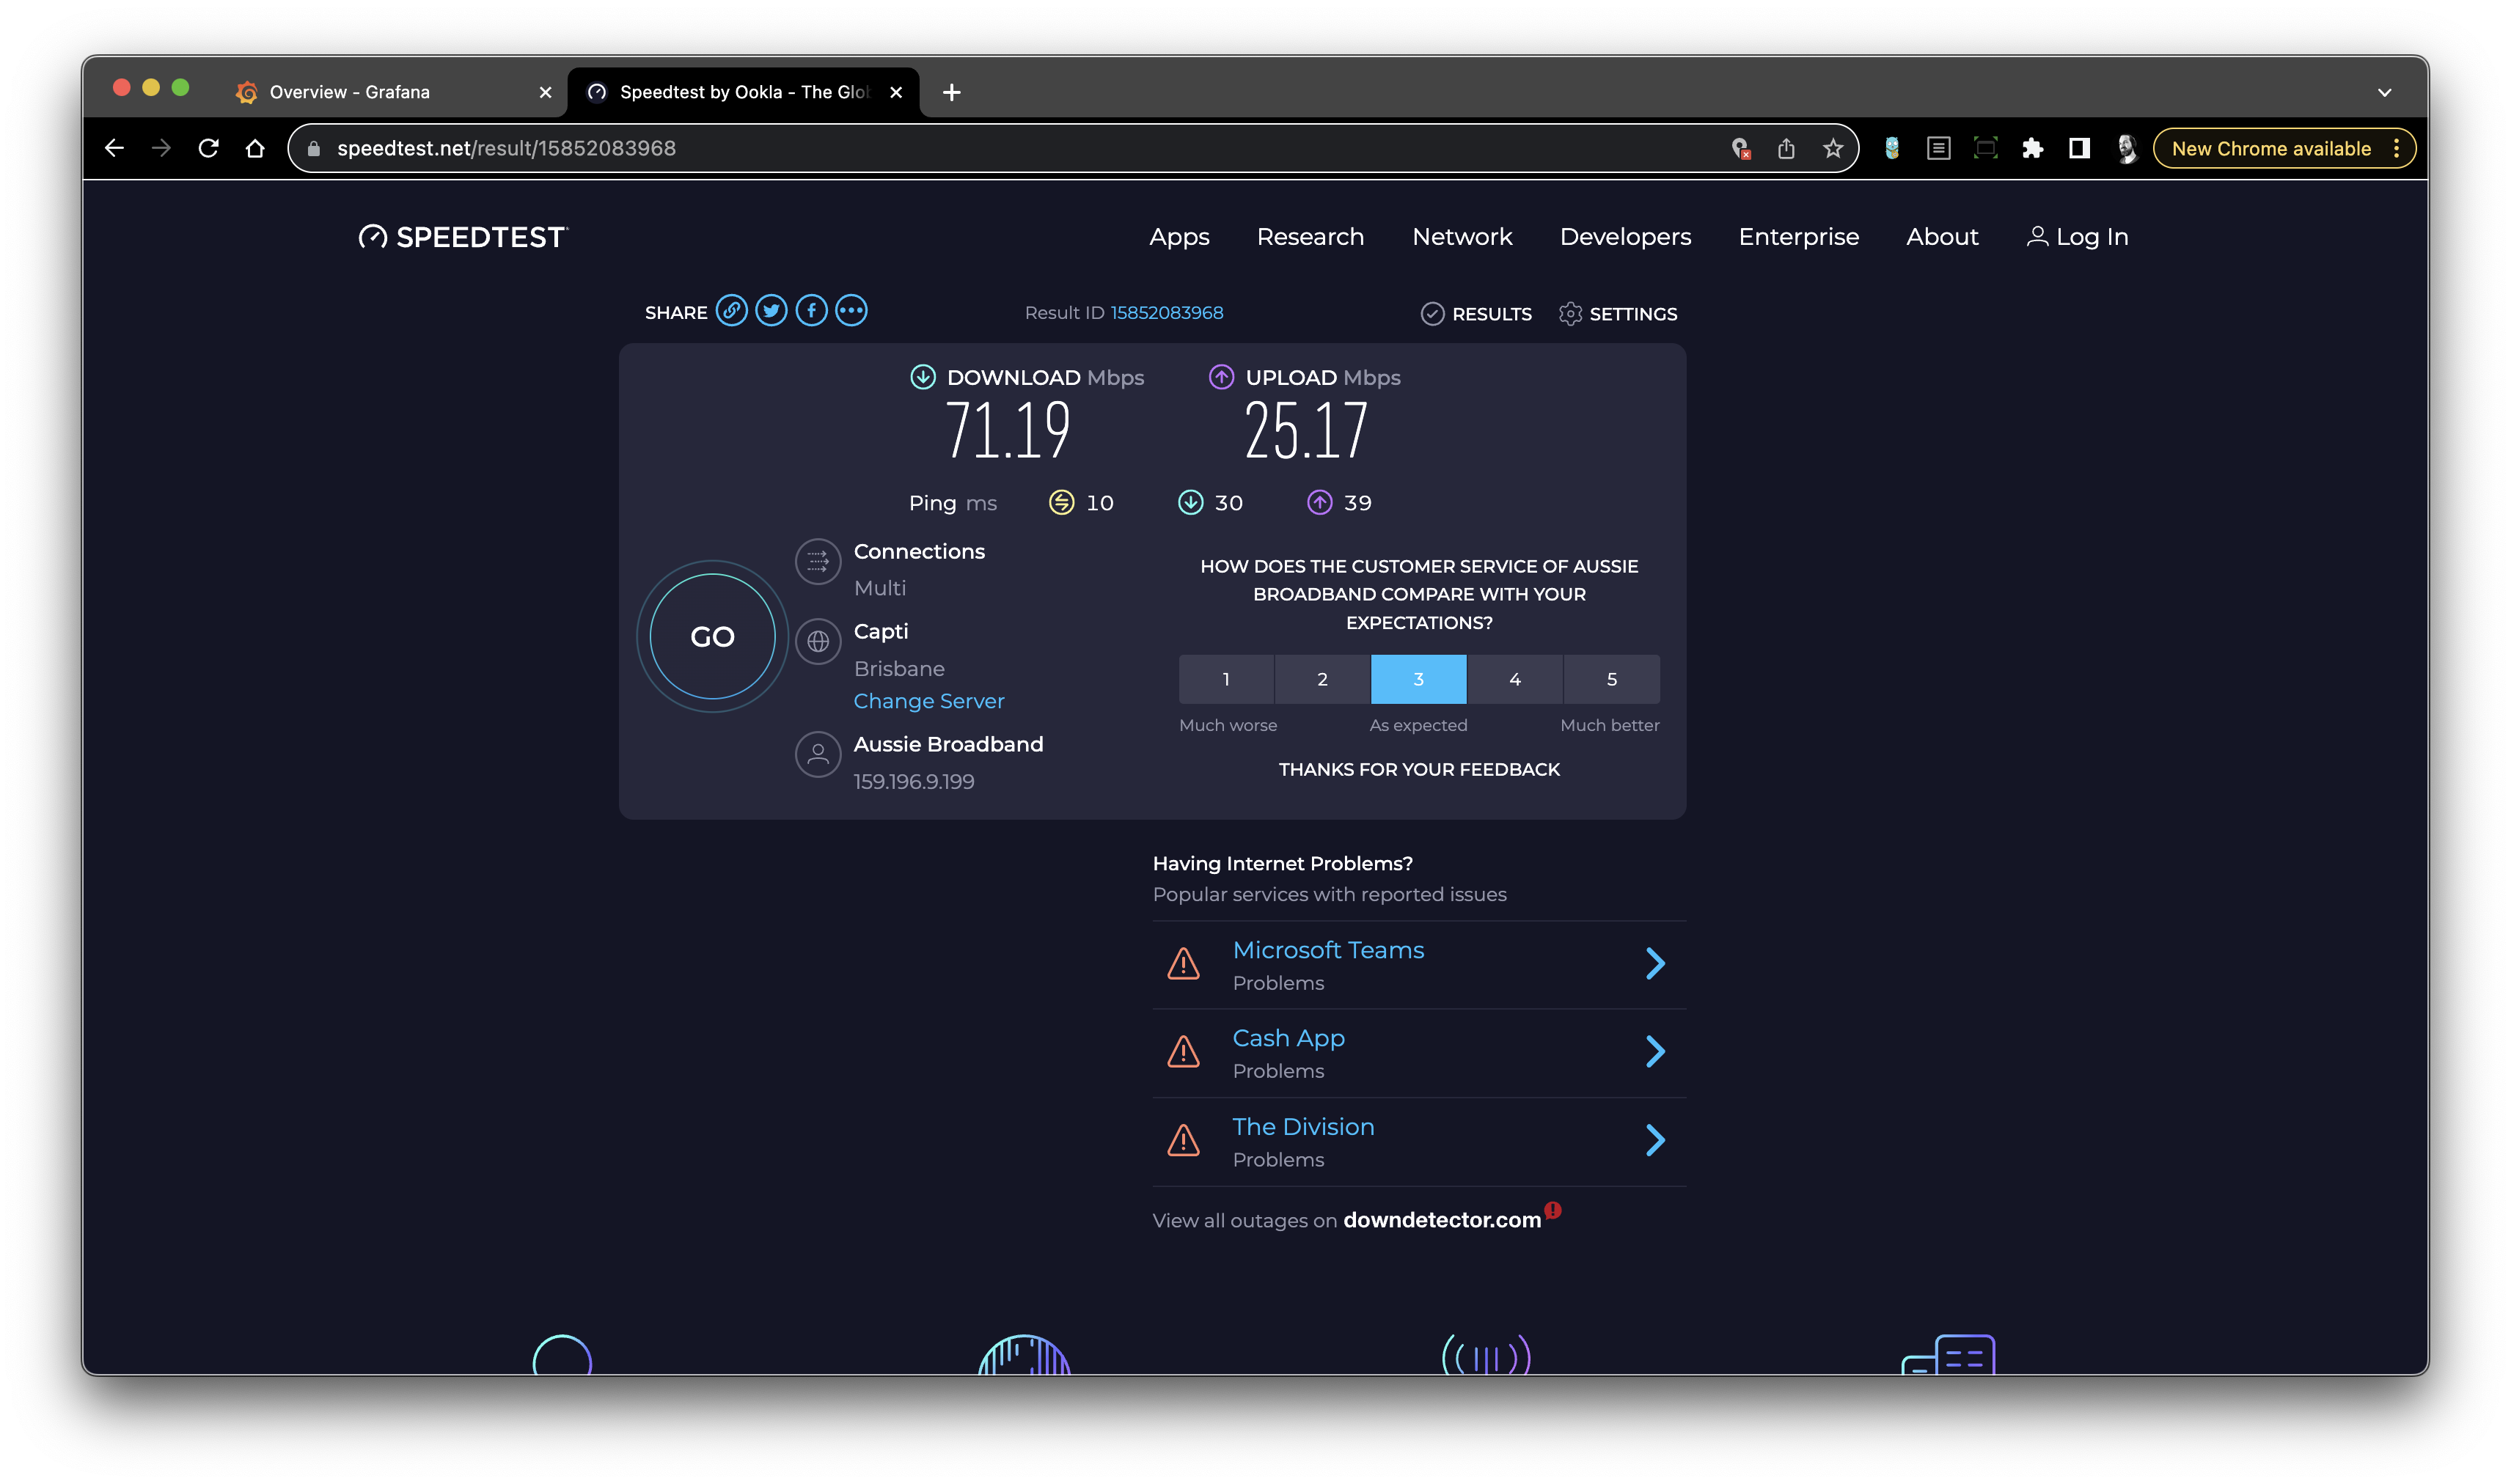 Performance of FTTN vDSL before the upgrade